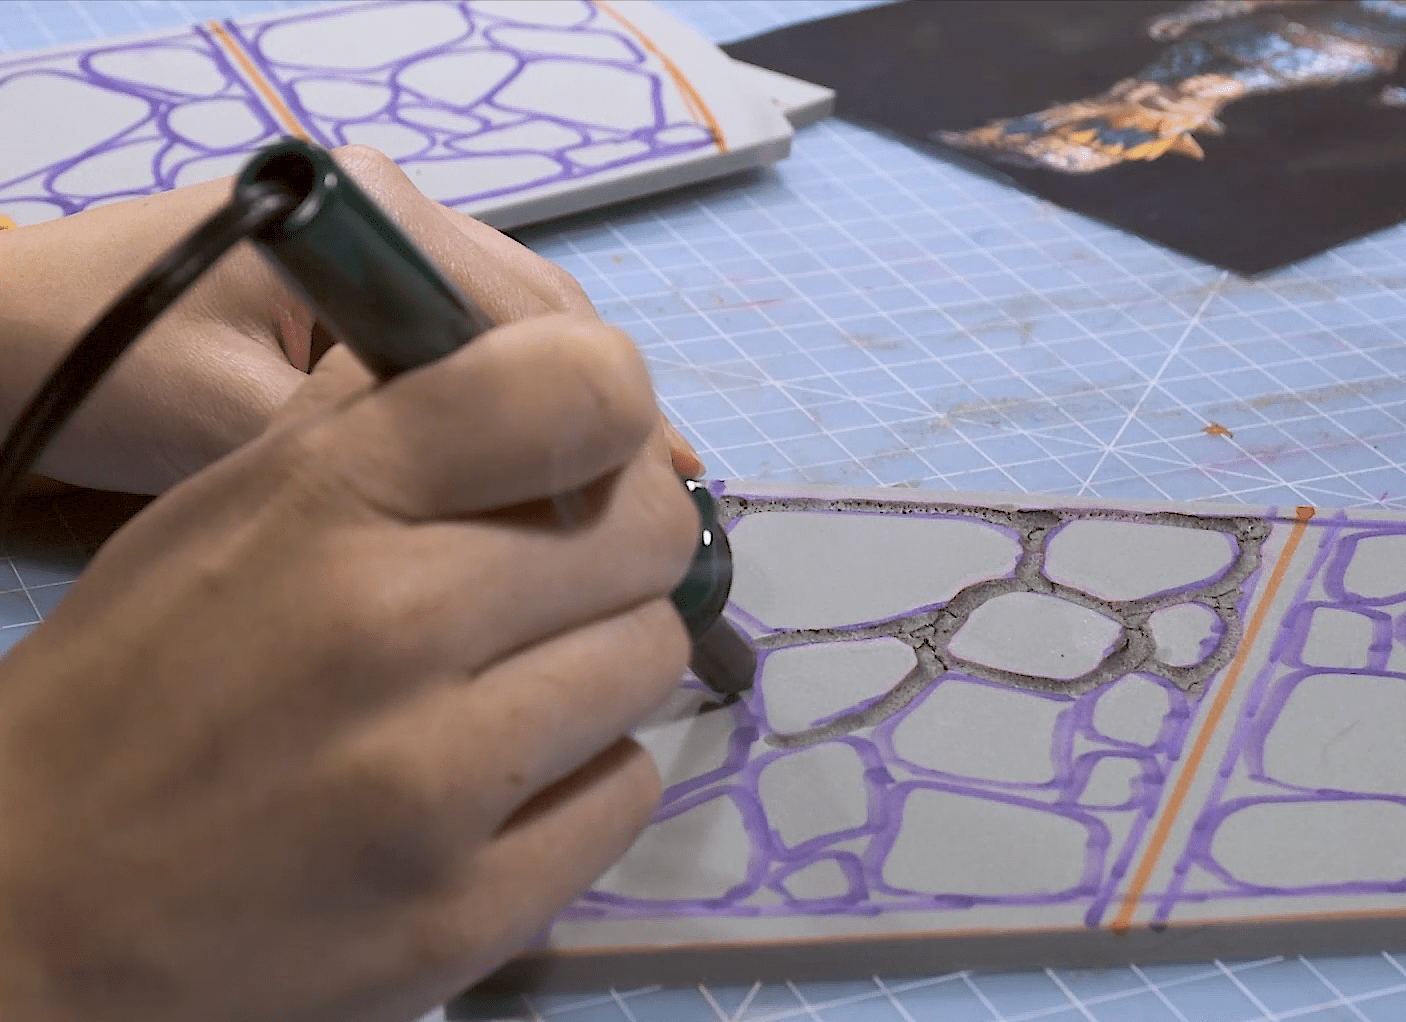 Cosplayer carving scales into foam cosplay armor using hot soldering iron